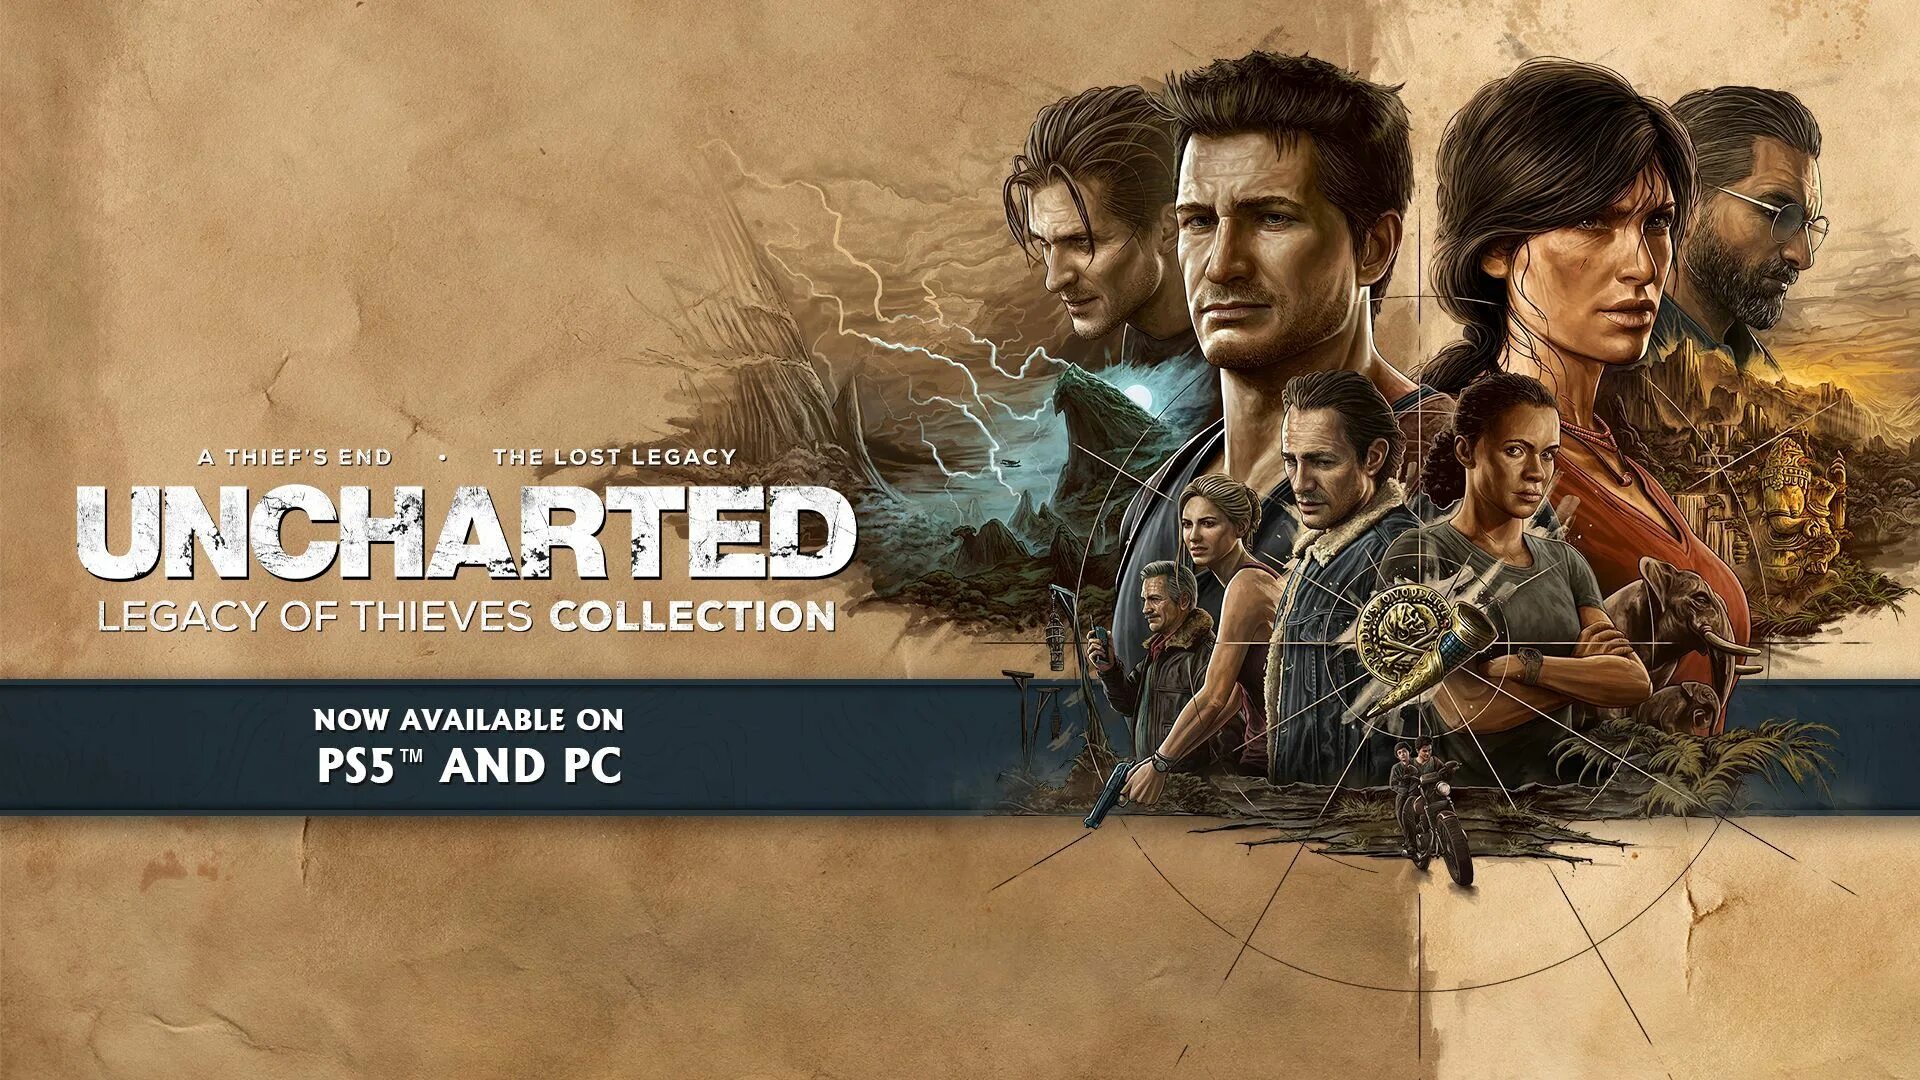 Uncharted legacy of thieves купить. Uncharted™: наследие воров. Legacy of Thieves collection. Uncharted на ПК. Uncharted Legacy of Thieves collection на ПК.